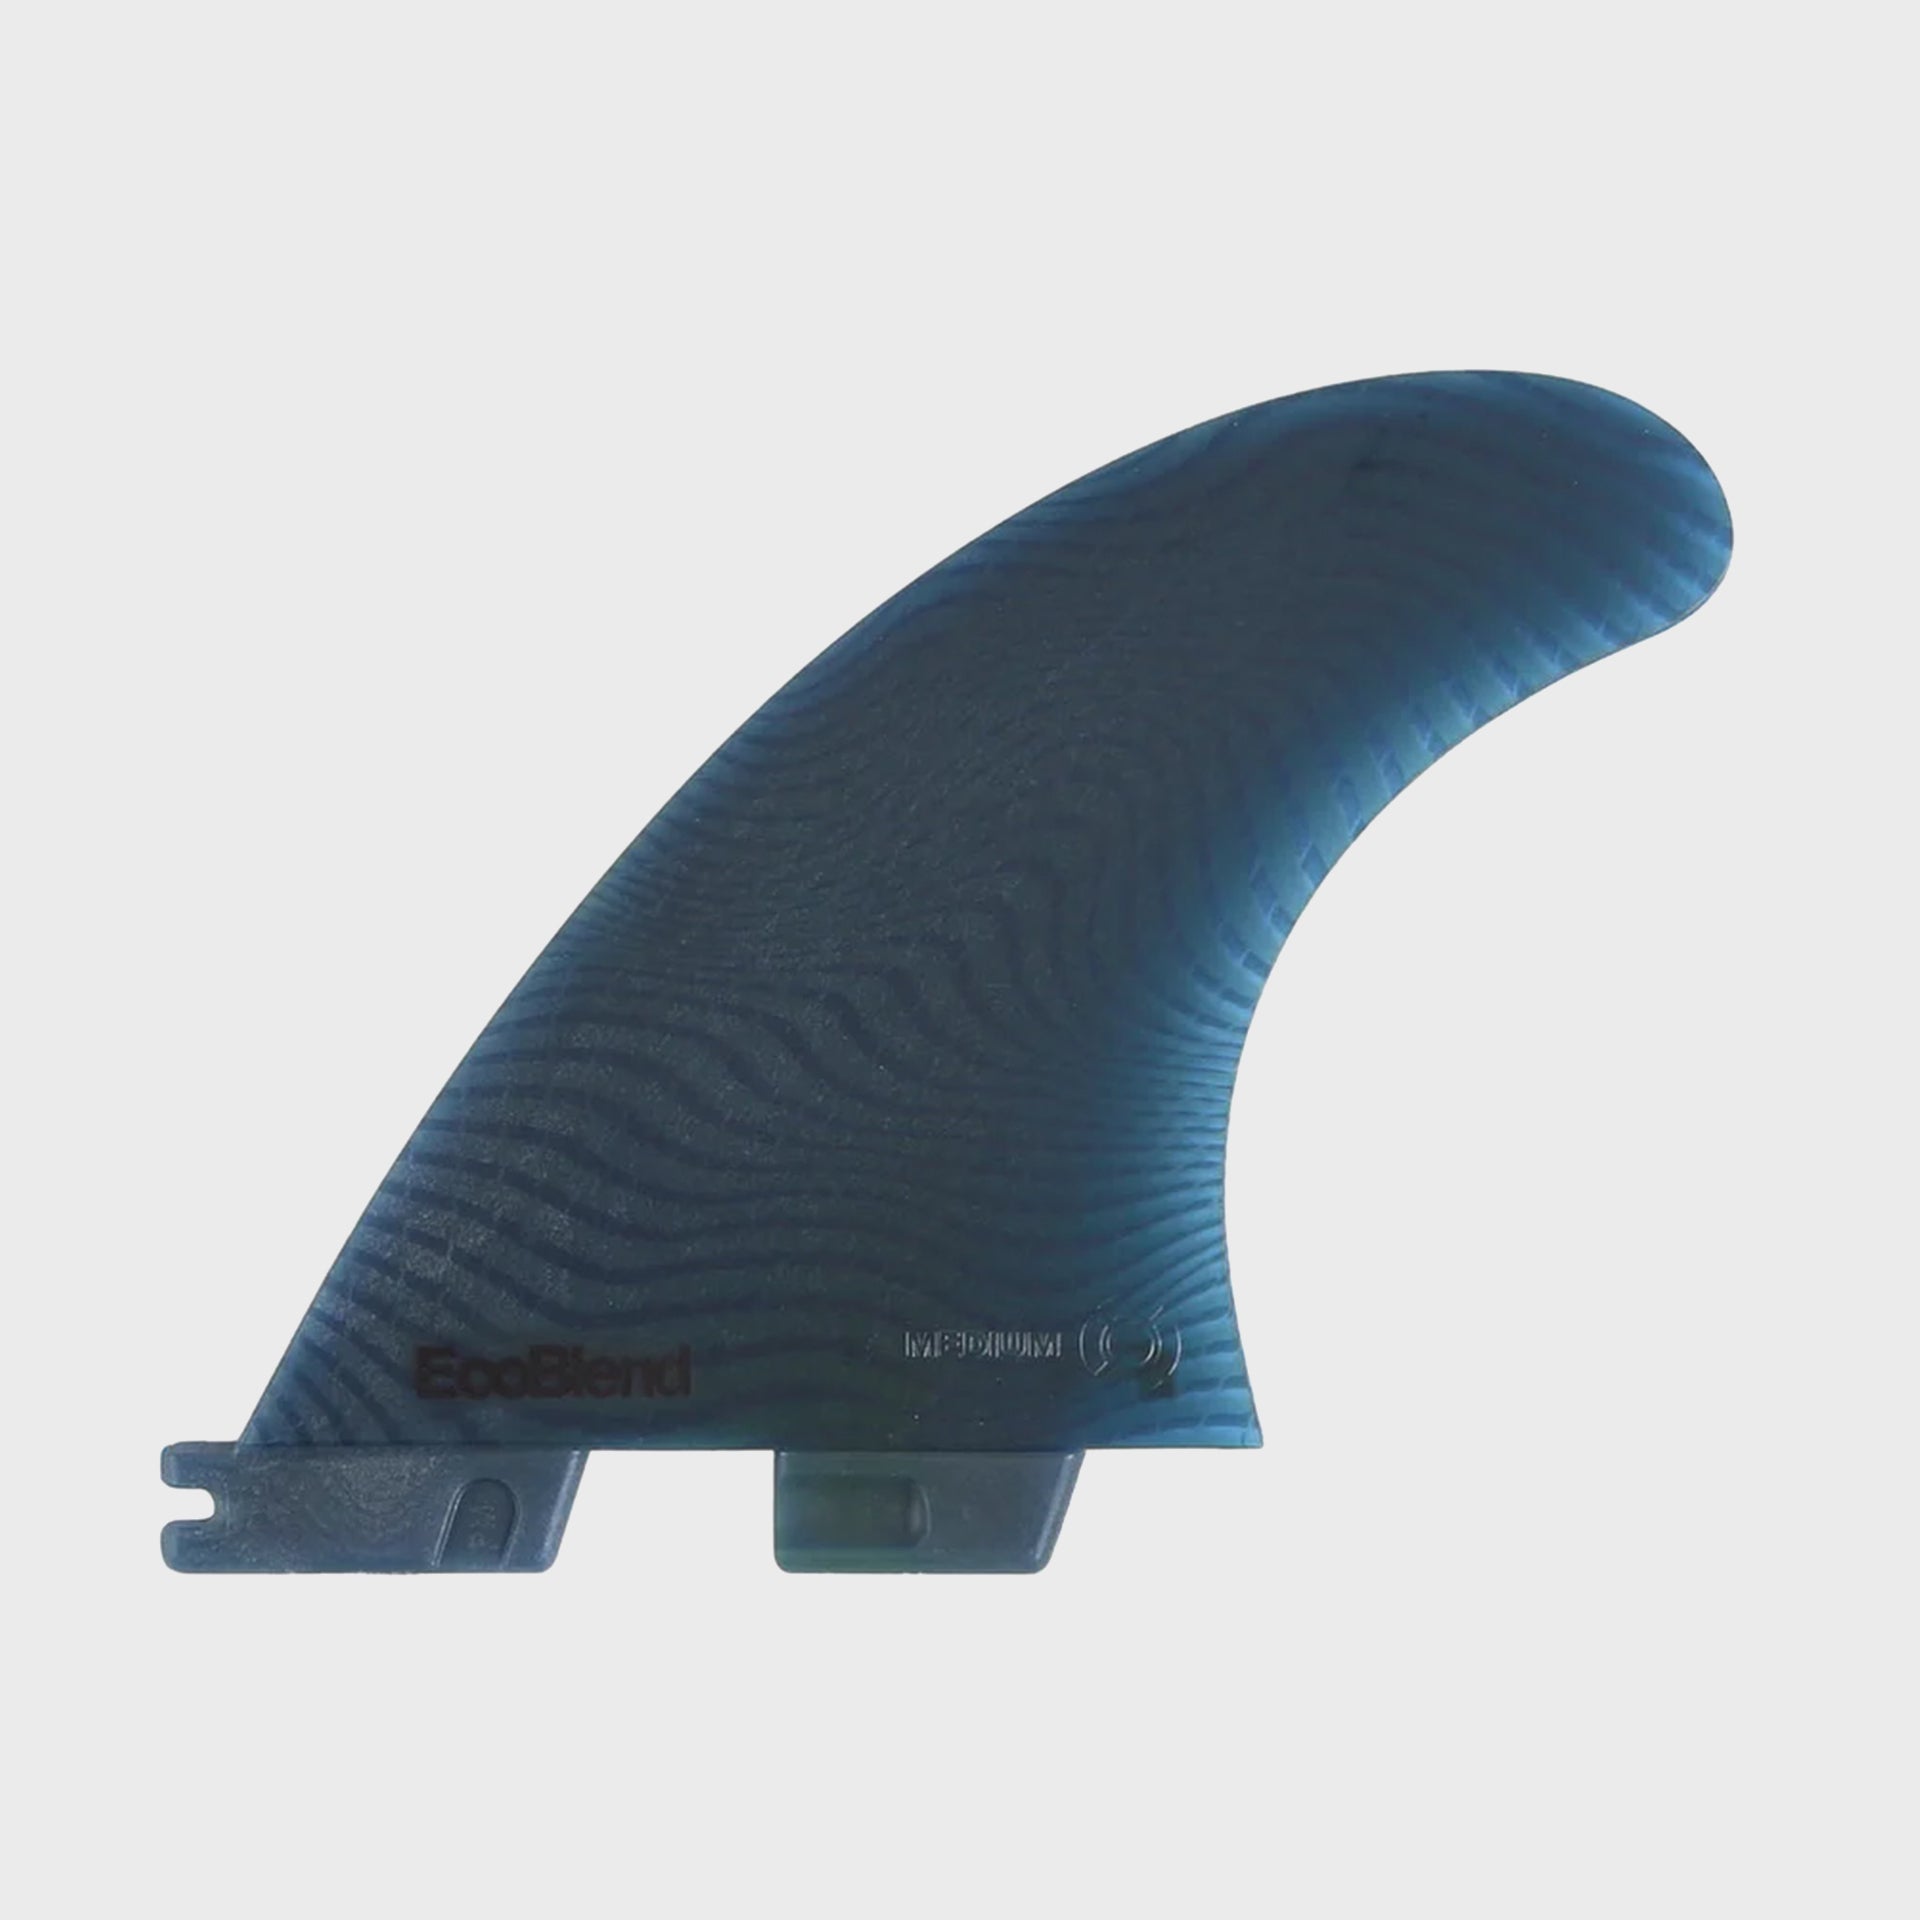 FCS Neo Glass Eco Performer FCS II Tri Fins - Large - Pacific - ManGo Surfing